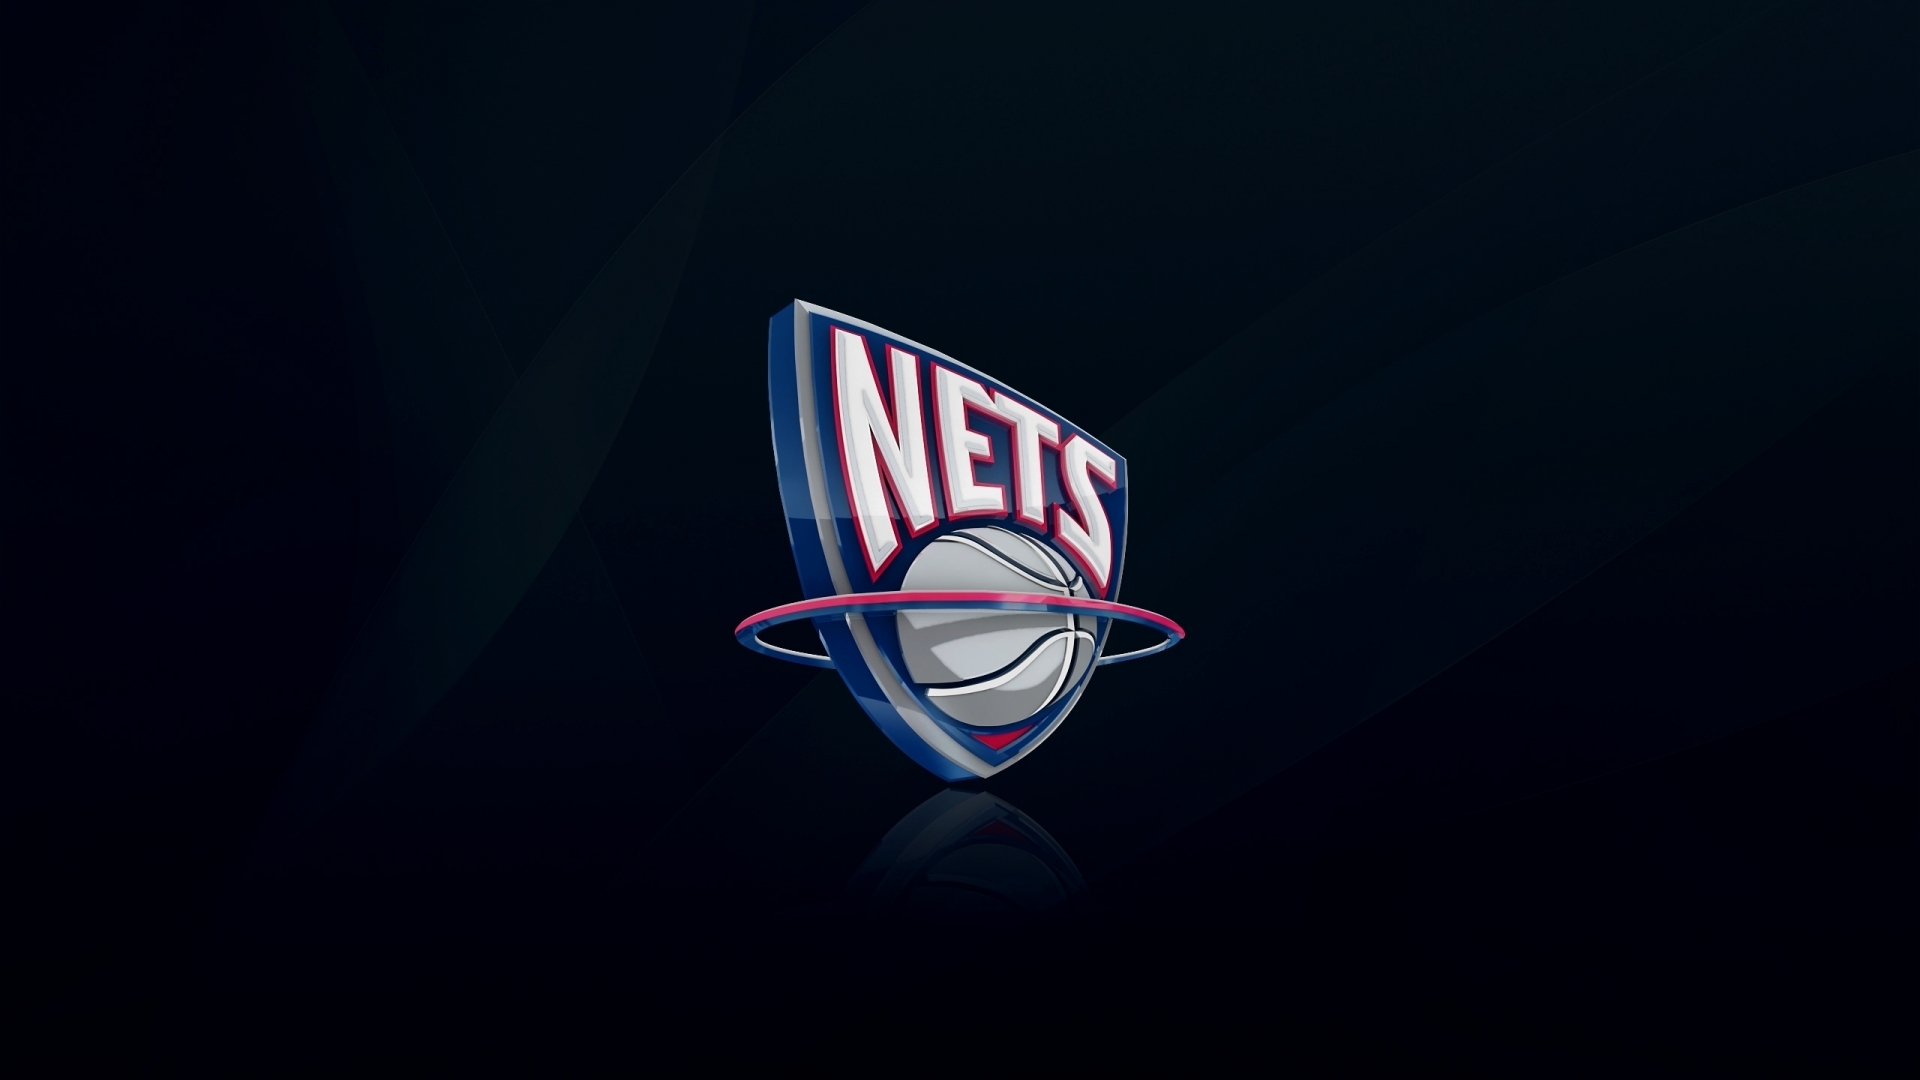 New Jersey Nets Logo for 1920 x 1080 HDTV 1080p resolution